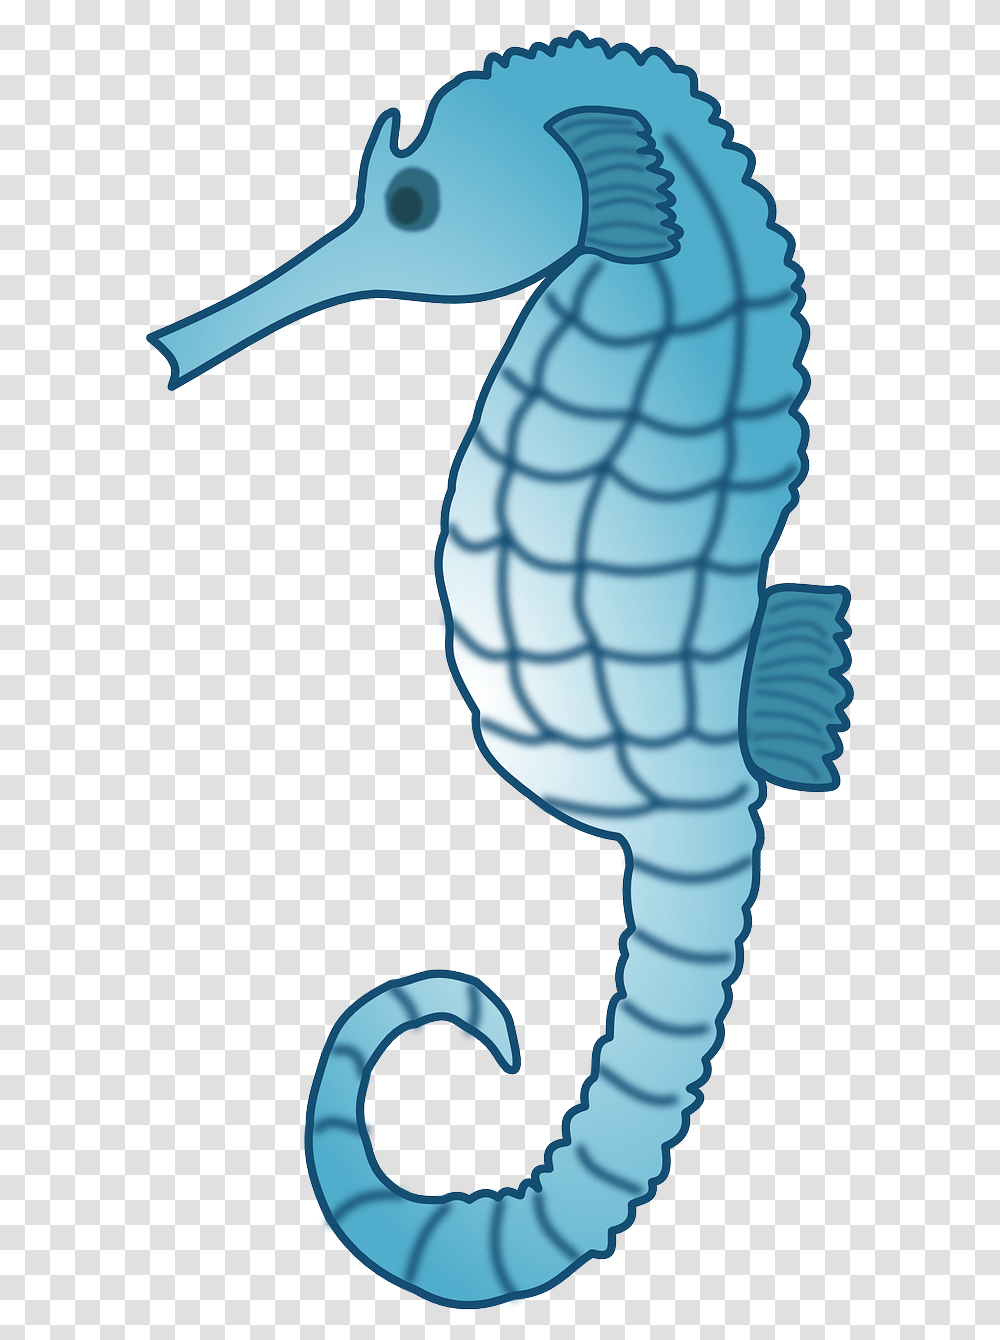 Seahorse Free To Use Cliparts Seahorses Clip Art, Axe, Tool, Animal, Toothbrush Transparent Png